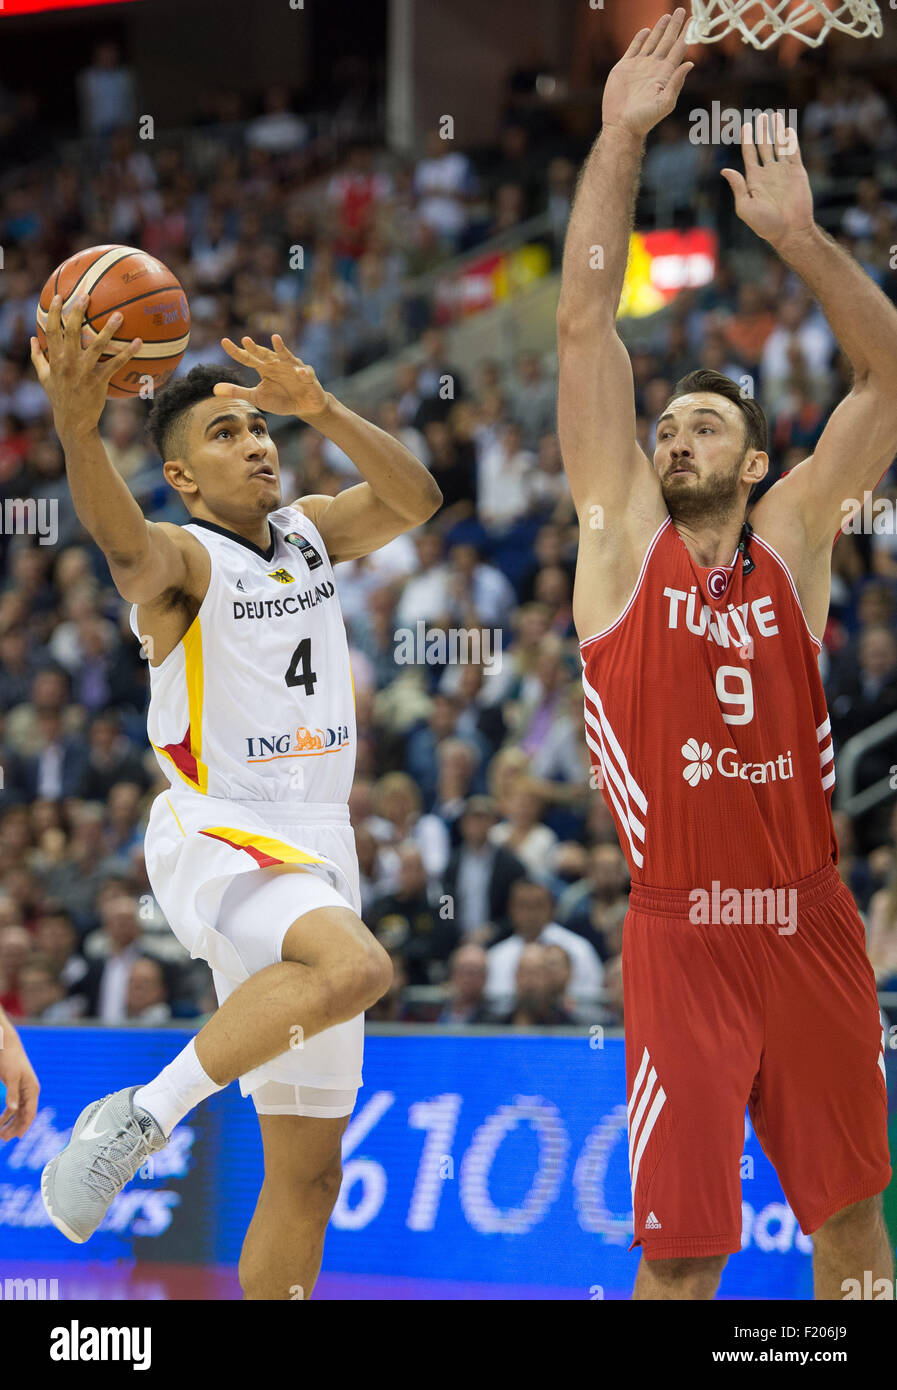 Berlin, Germany. 08th Sep, 2015. Germany's Maodo Lo (l) and Turkey's Semih Erden (r) in action during the FIBA EuroBasket 2015 Group B match between Germany and Turkey, at the Mercedes-Benz-Arena in Berlin, Germany, 08 September 2015. Germany lost 75:80. Photo: Lukas Schulze/dpa/Alamy Live News Stock Photo